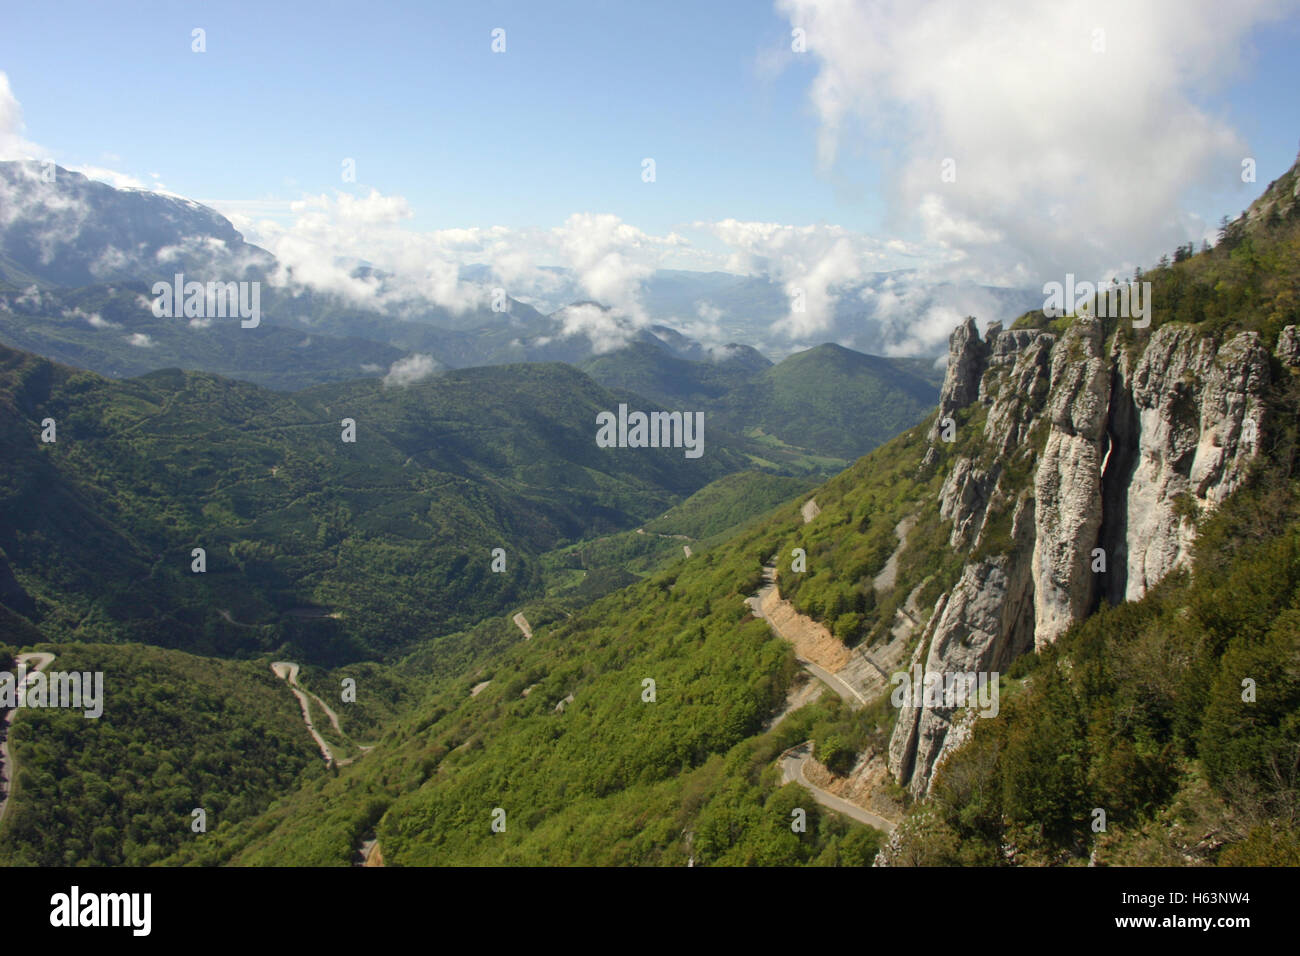 French lower alpine valley landscape Stock Photo